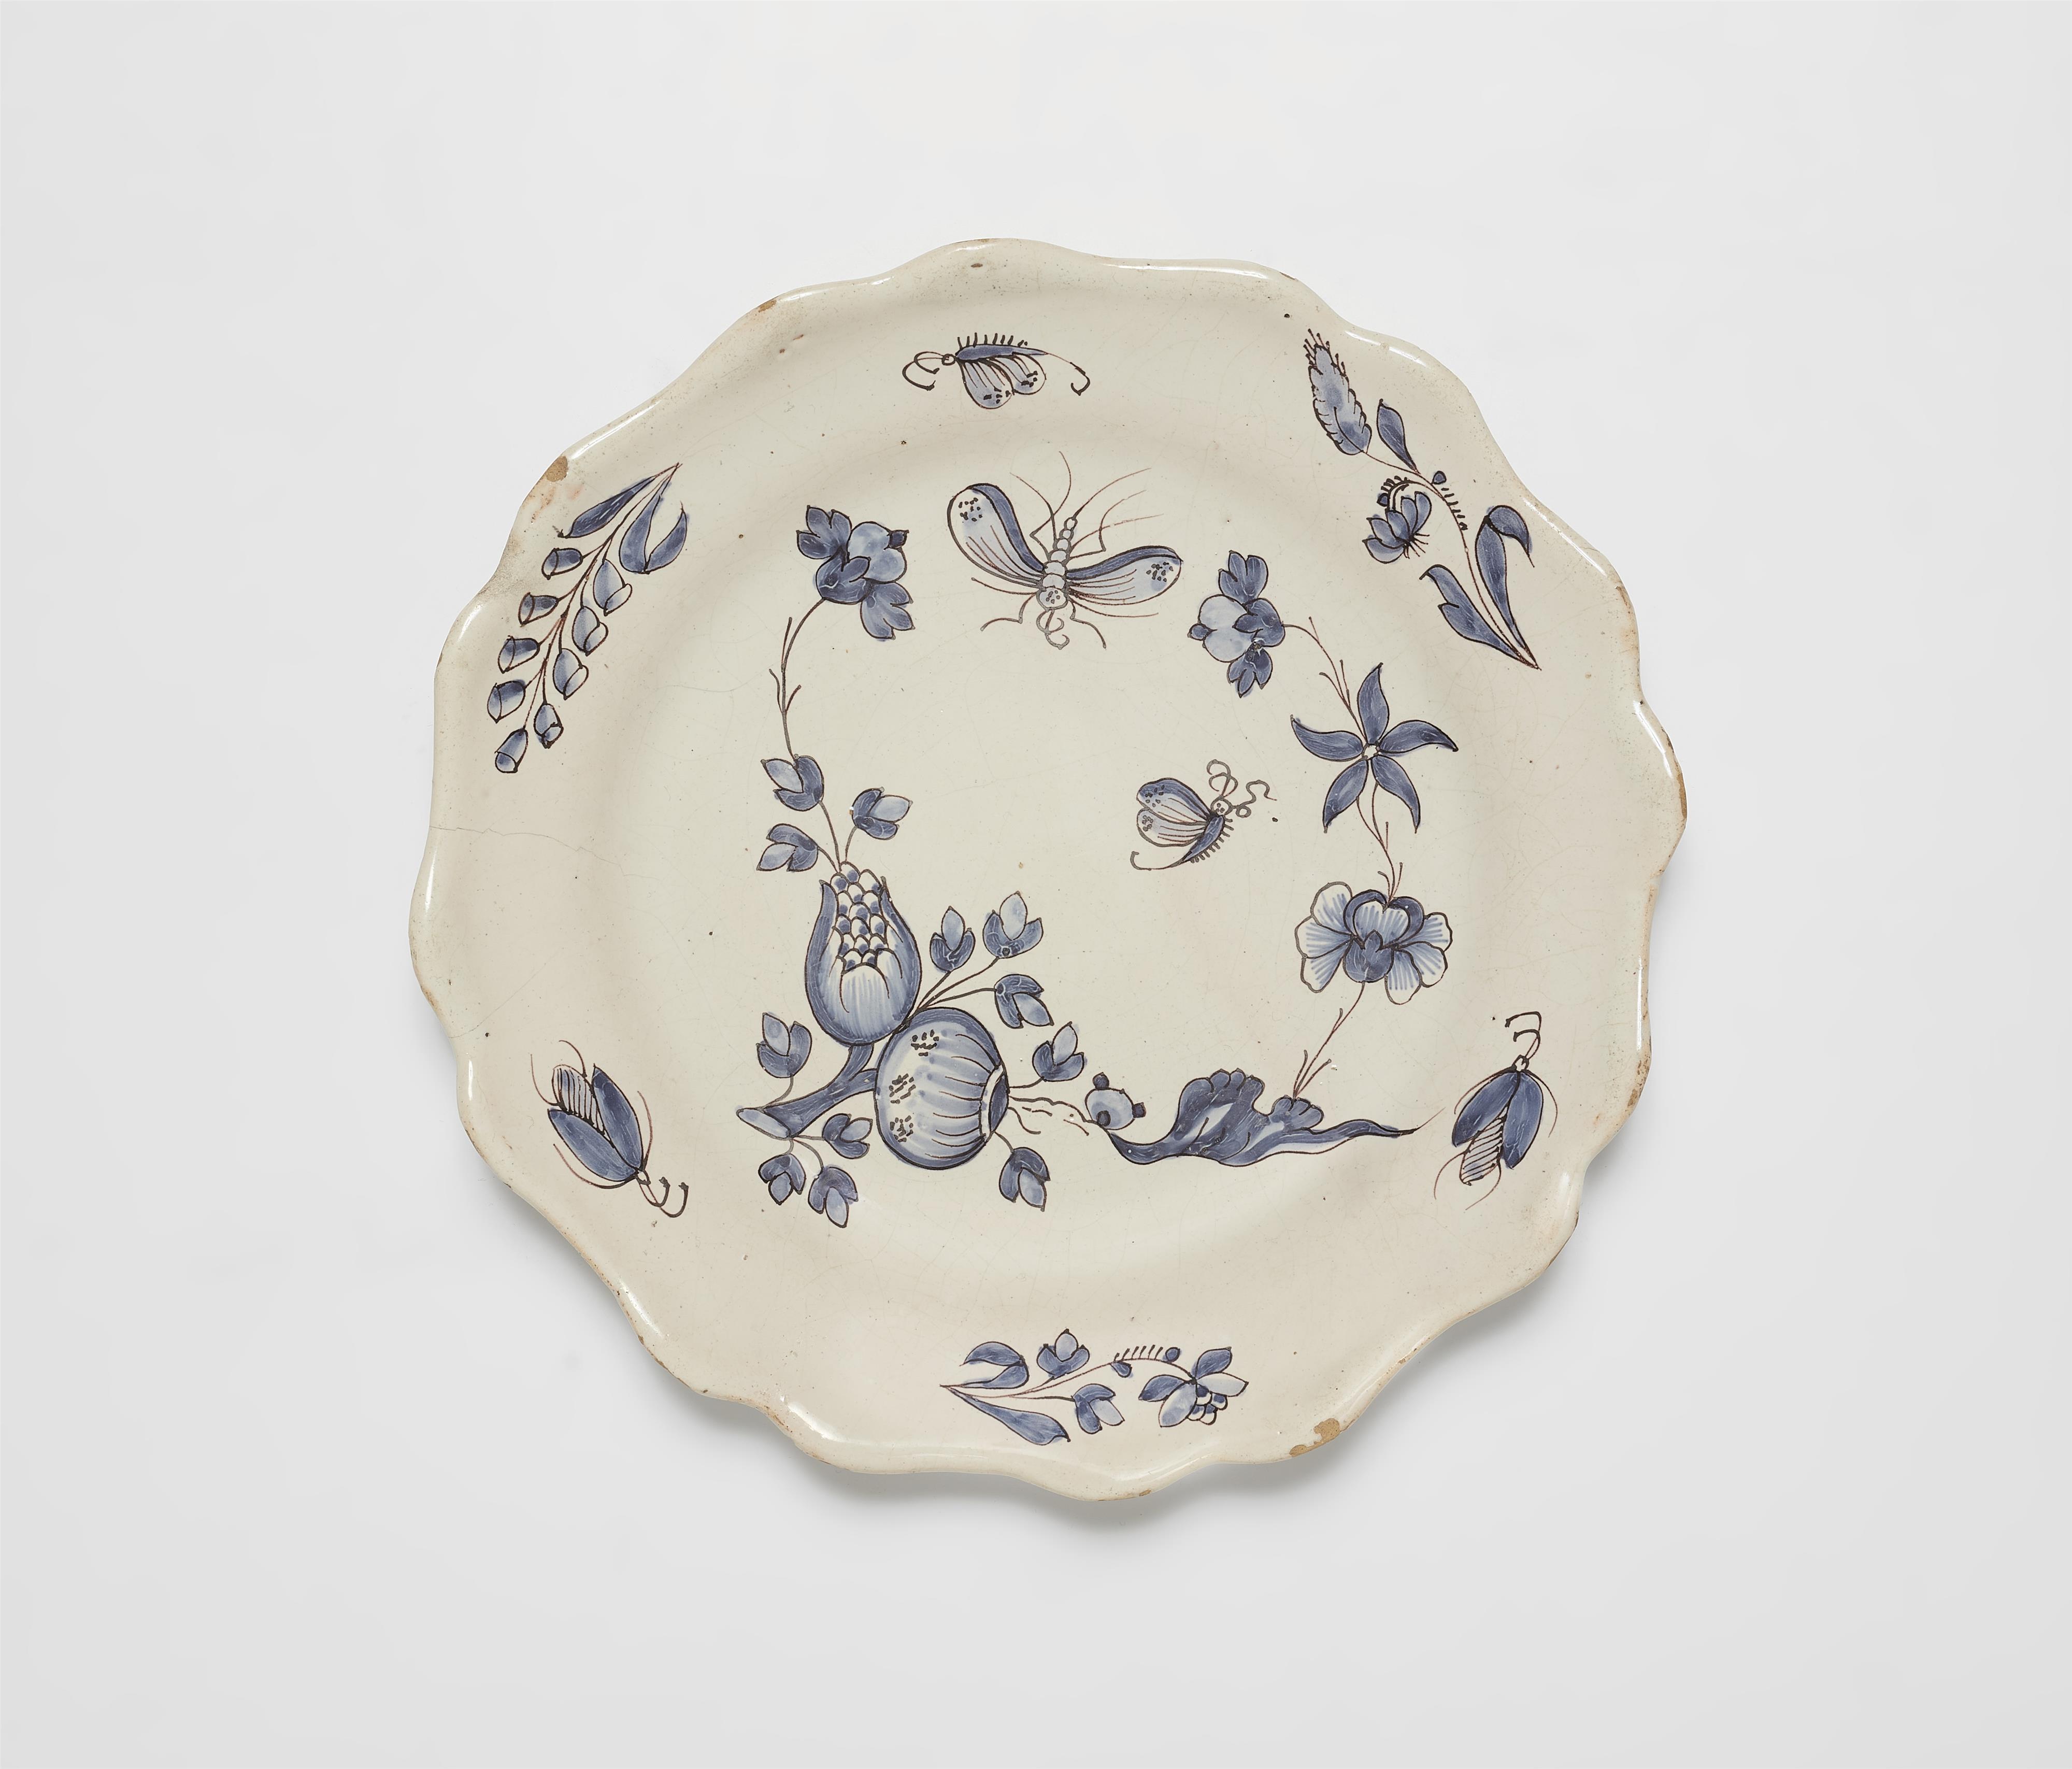 A French faience plate with "fleurs contournées" and insect motifs - image-1